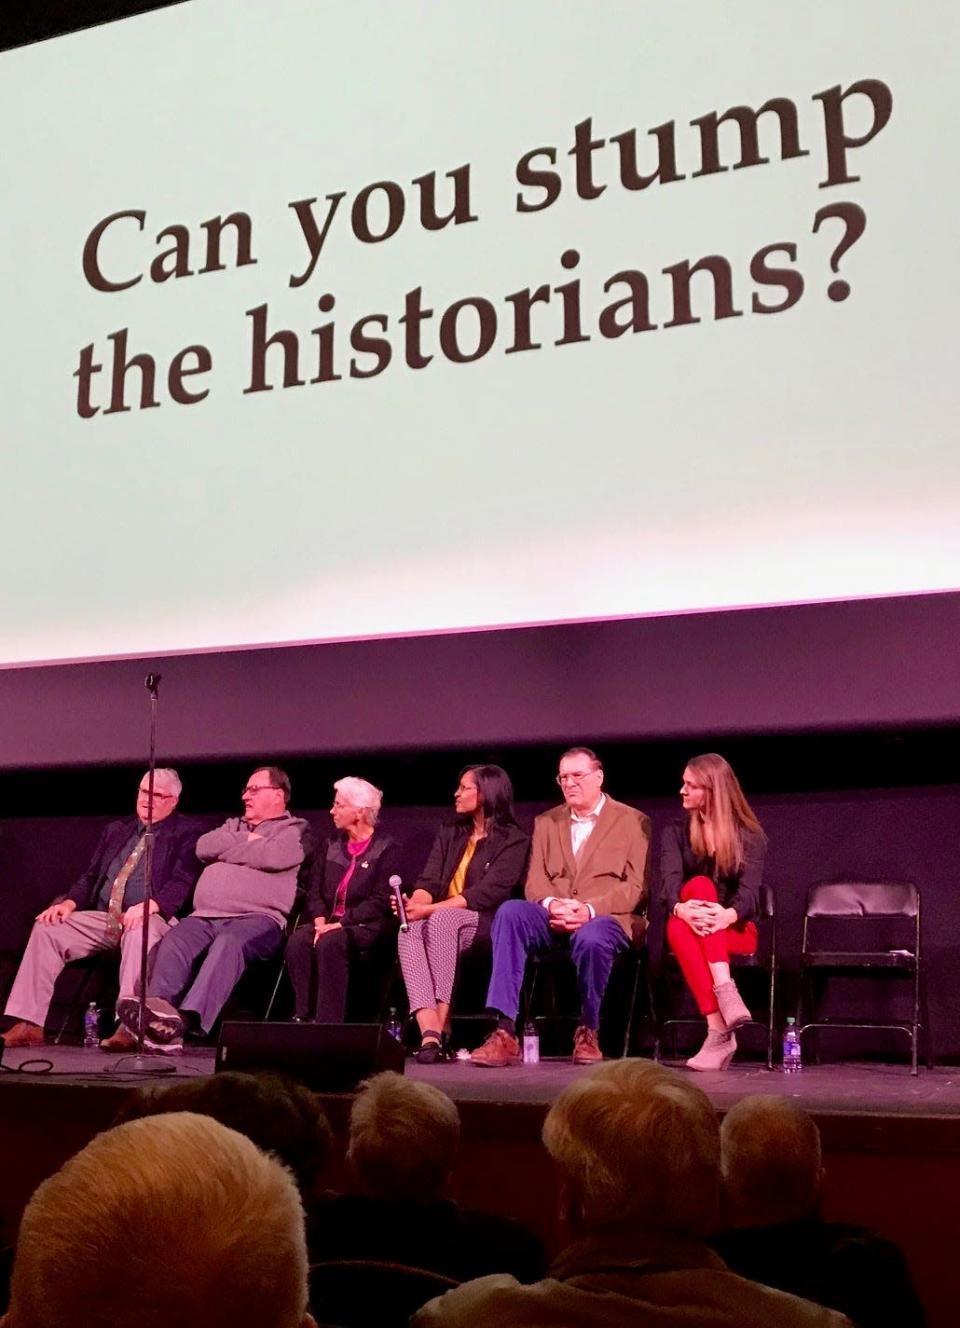 The historians at the last of five evenings of York County History Storytellers in 2019 presented before a capacity audience at Appell’s Center’s Capitol Theater. The Storytellers will return on 7 p.m. Dec. 7 at Wyndridge Farm, presented by Hometown History, the York Daily Record and the York County History Center. Historians on the 2023 panel: June Burk Lloyd, Stephen H. Smith, Samantha Dorm, Jeri Jones, Cisco Soto and Caroline Smith. Historians Jamie Noerpel and Dominish Marie Miller will tell about the rich history of Wyndridge in a “Hometown History” segment.